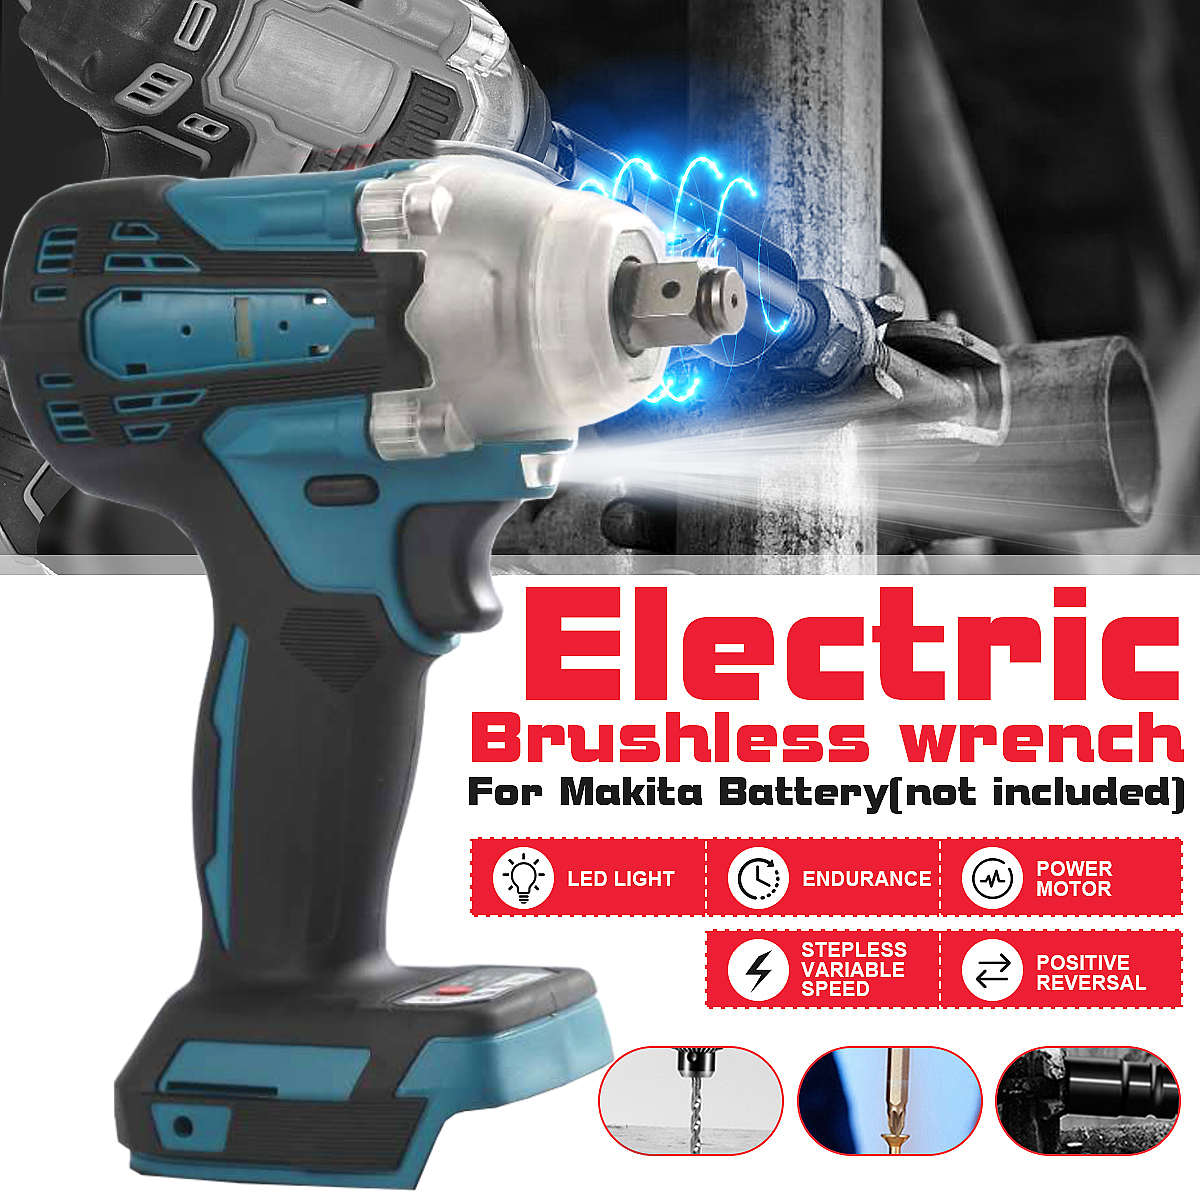 800Nm-Brushless-Cordless-12-Impact-Wrench-Driver-Replacement-for-Makita-18V-Battery-1765713-1